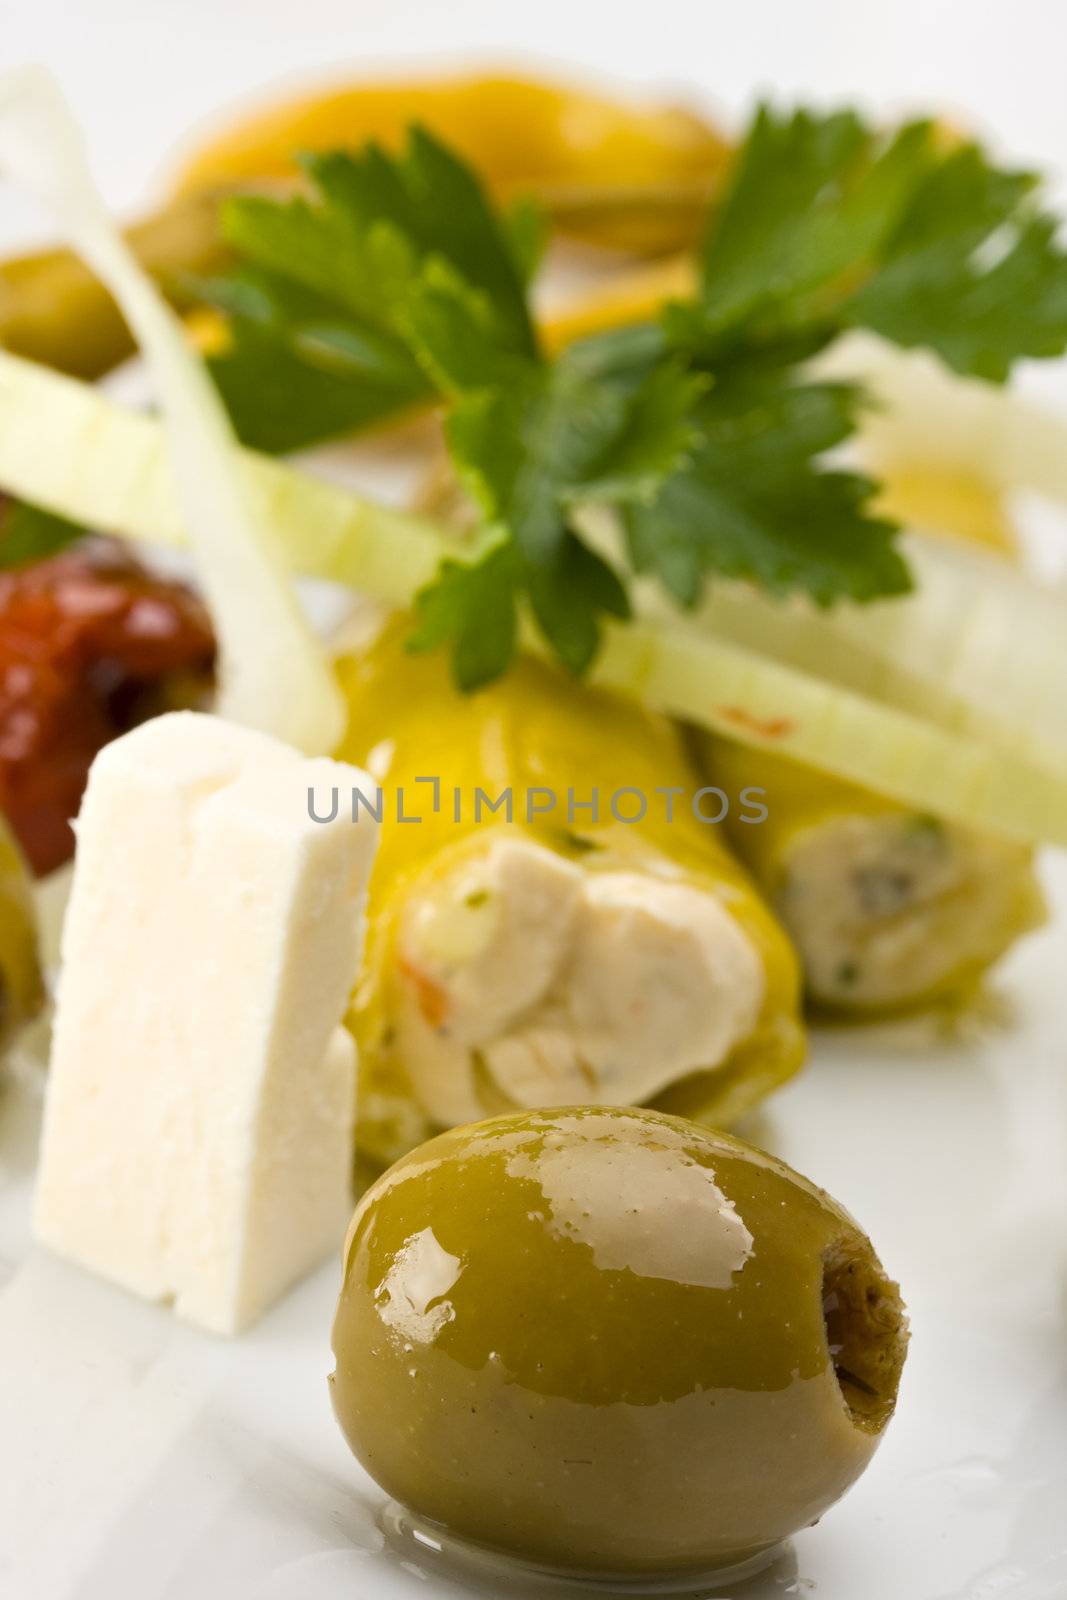 white plate with antipasti - olives, tomatos and peperoni by bernjuer